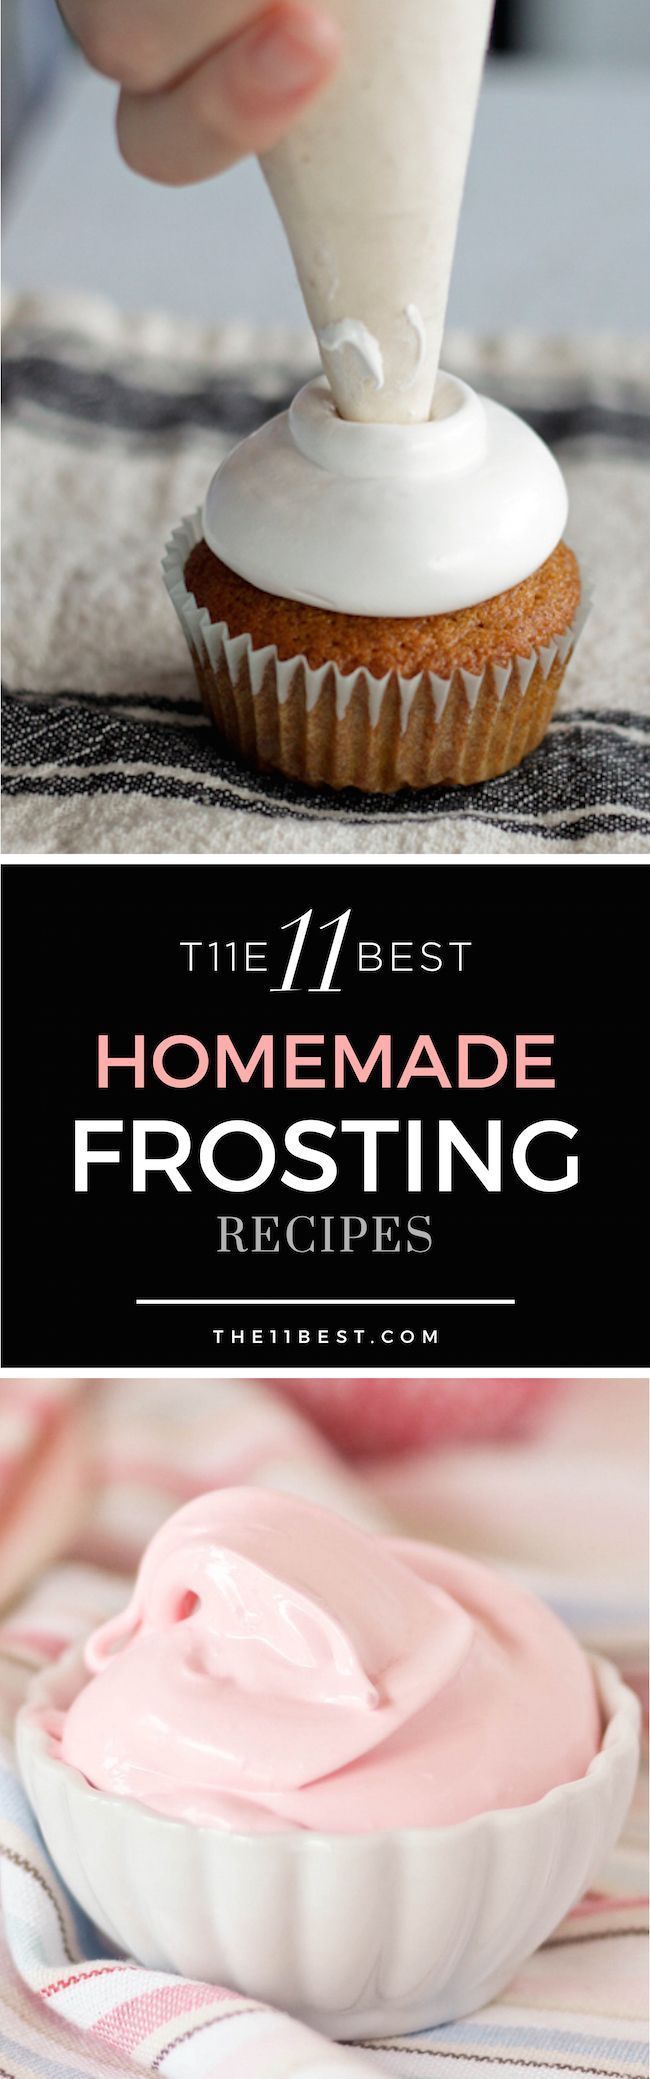 The 11 Best Homemade Frosting Recipes